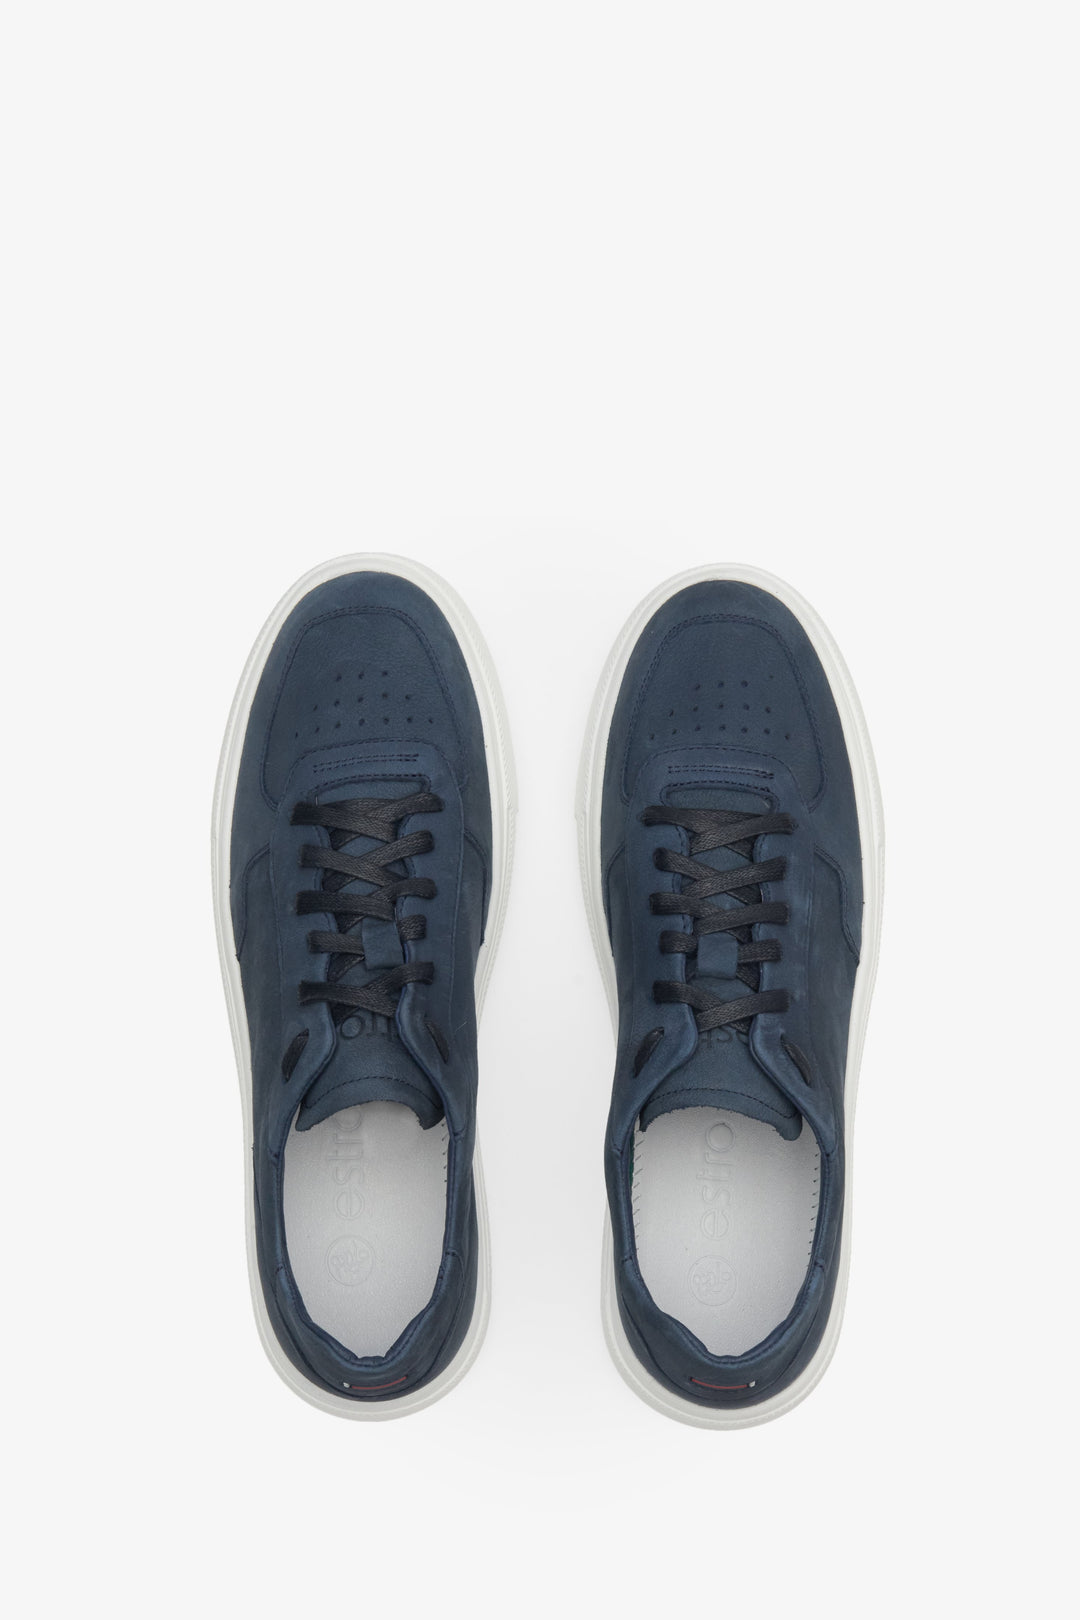 Spring-autumn men's Estro sneakers made of genuine nubuck in blue - presentation of the footwear from the toe.